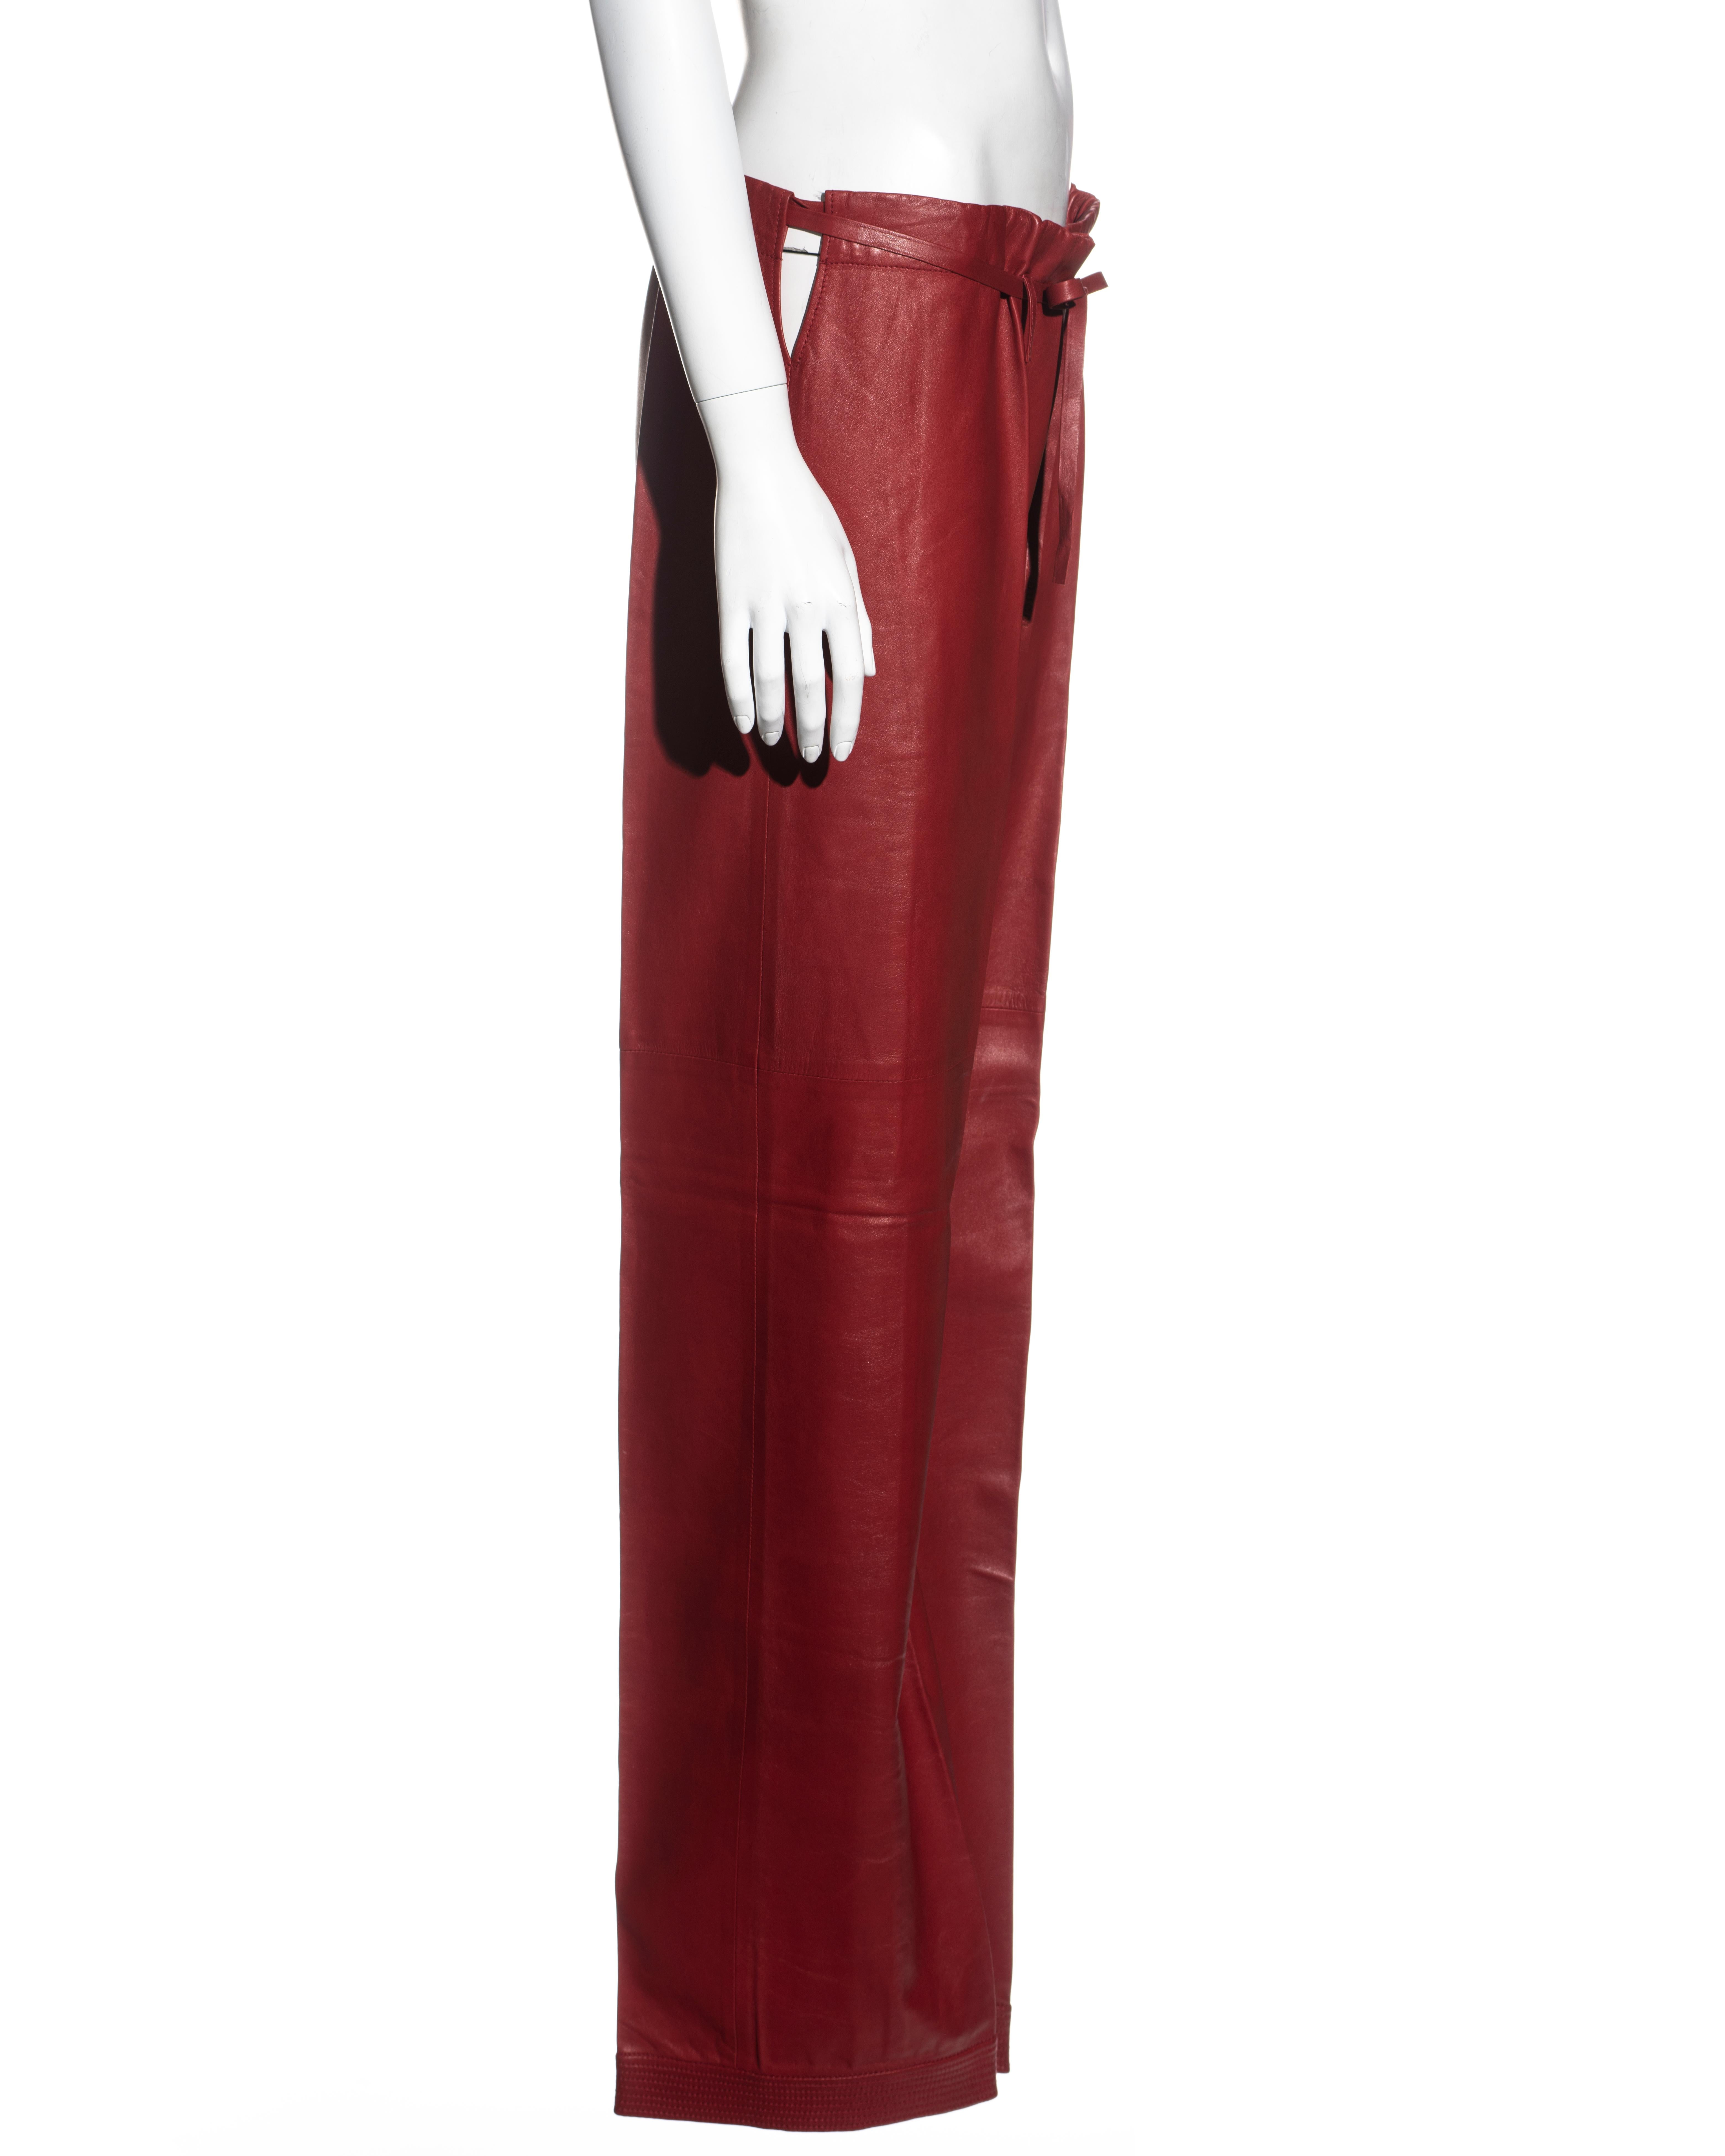 Gucci by Tom Ford red lambskin leather wide leg drawstring pants, ss 2001 In Excellent Condition For Sale In London, GB